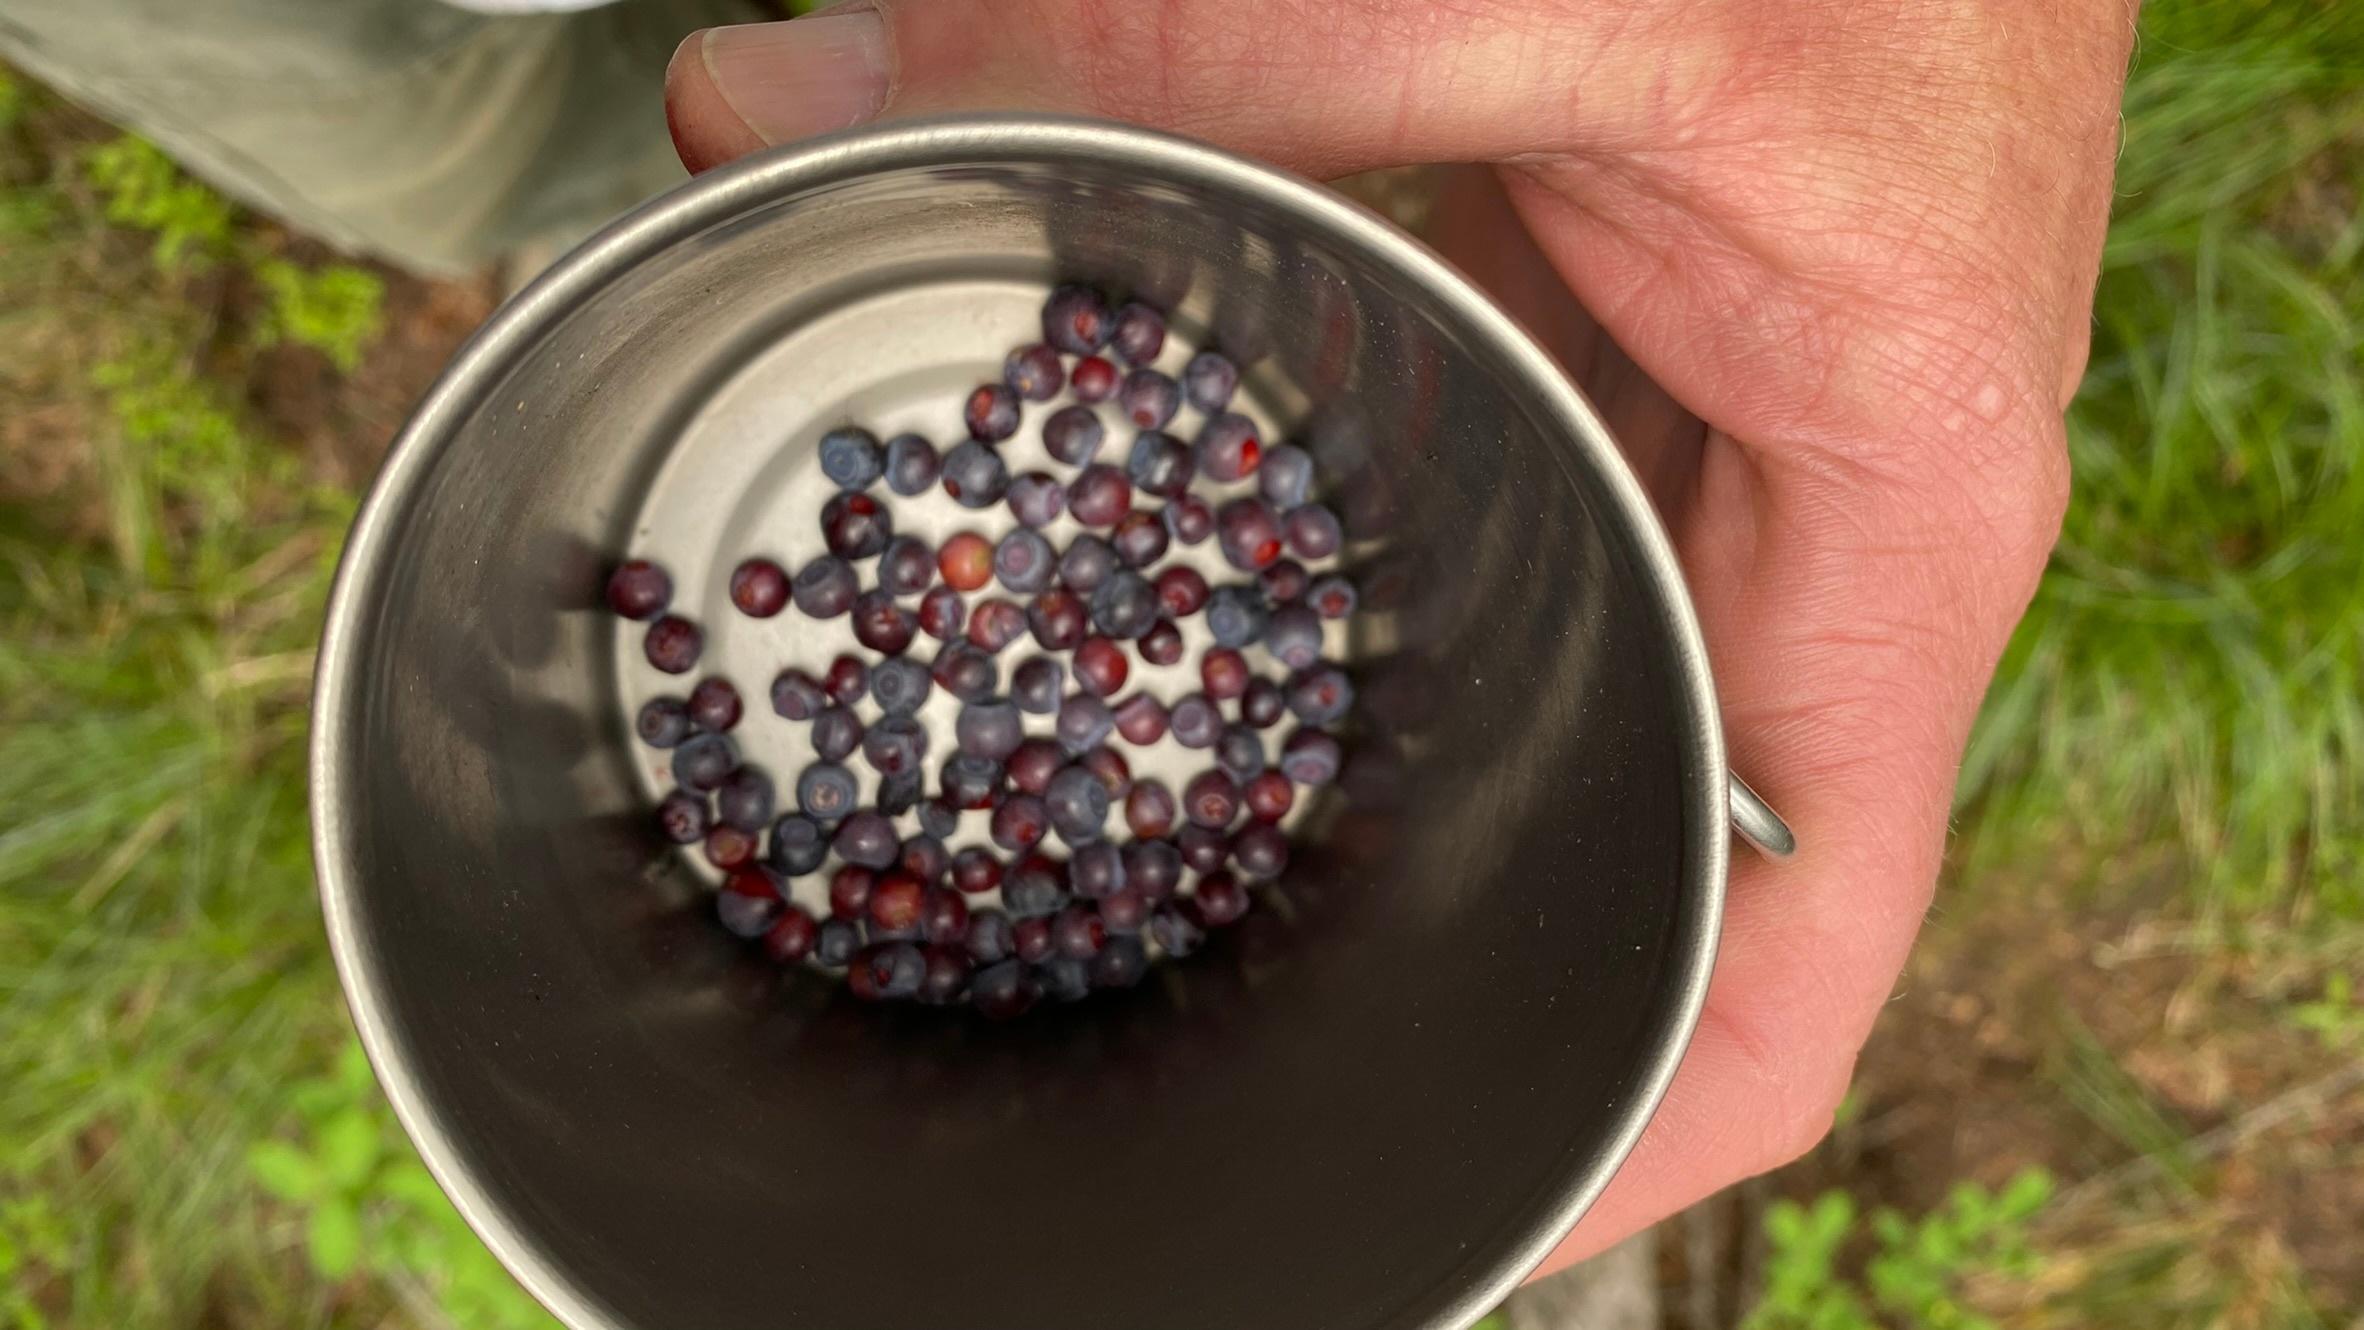 A close up image of small berries in a cup